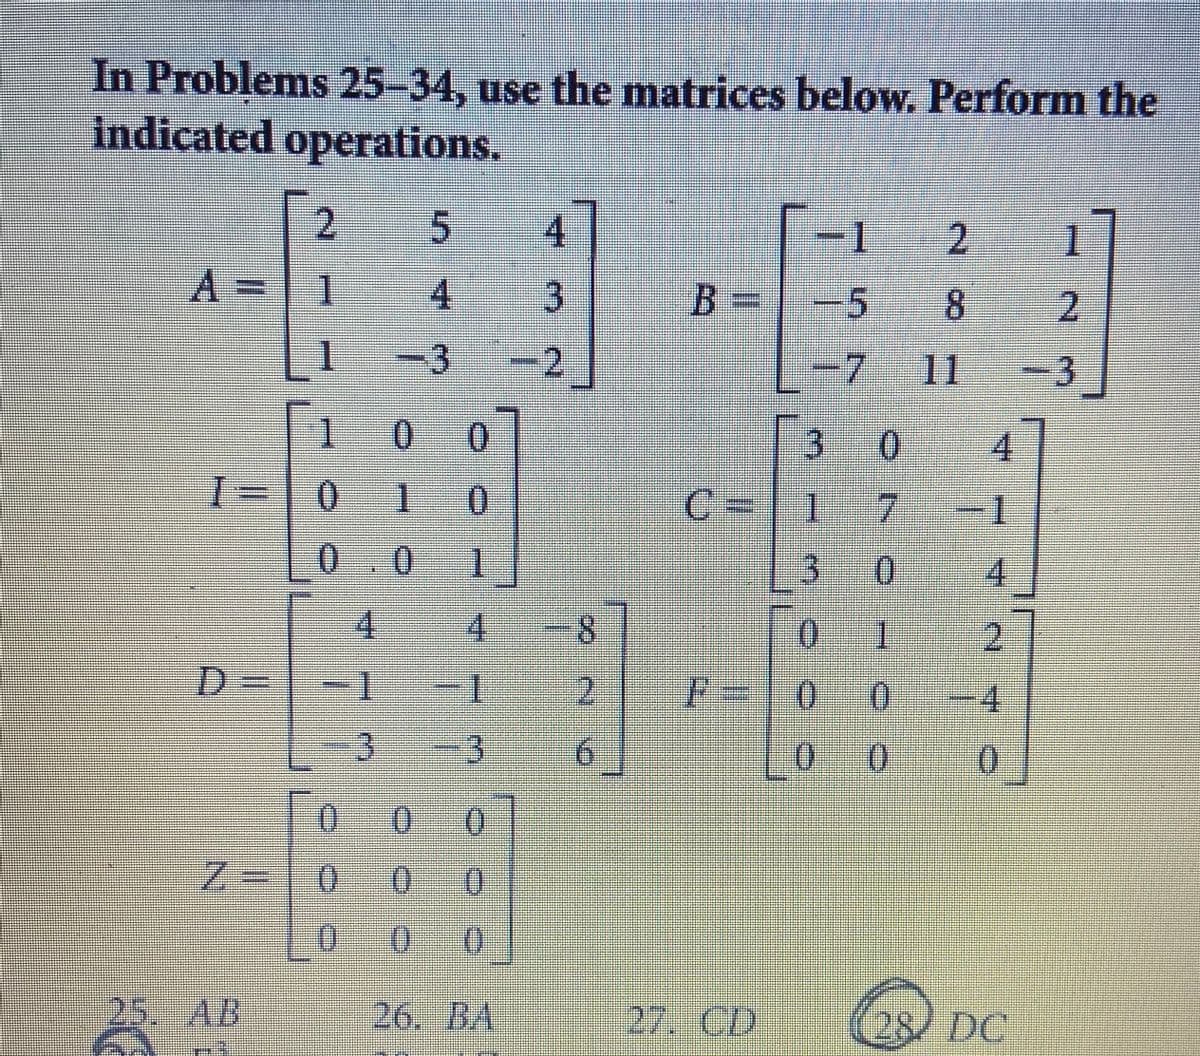 In Problems 25-34, use the matrices below. Perform the
Indicated operations.
2.
4.
1.
2
1.
1
4.
3
B%3=
-5
-3
2
-7
11
-3
1.
3 0
4.
1-0
1
0.
C-|1
7.
-1
0.0
1
4.
4.
4.
8.
0.
2.
D.
1-
2.
%3=
0.
4.
3.
0 0
0.
0.
0.
Z%3D10
0.
0.
()
25. AB
26. BA
27. CD
28/ DC
